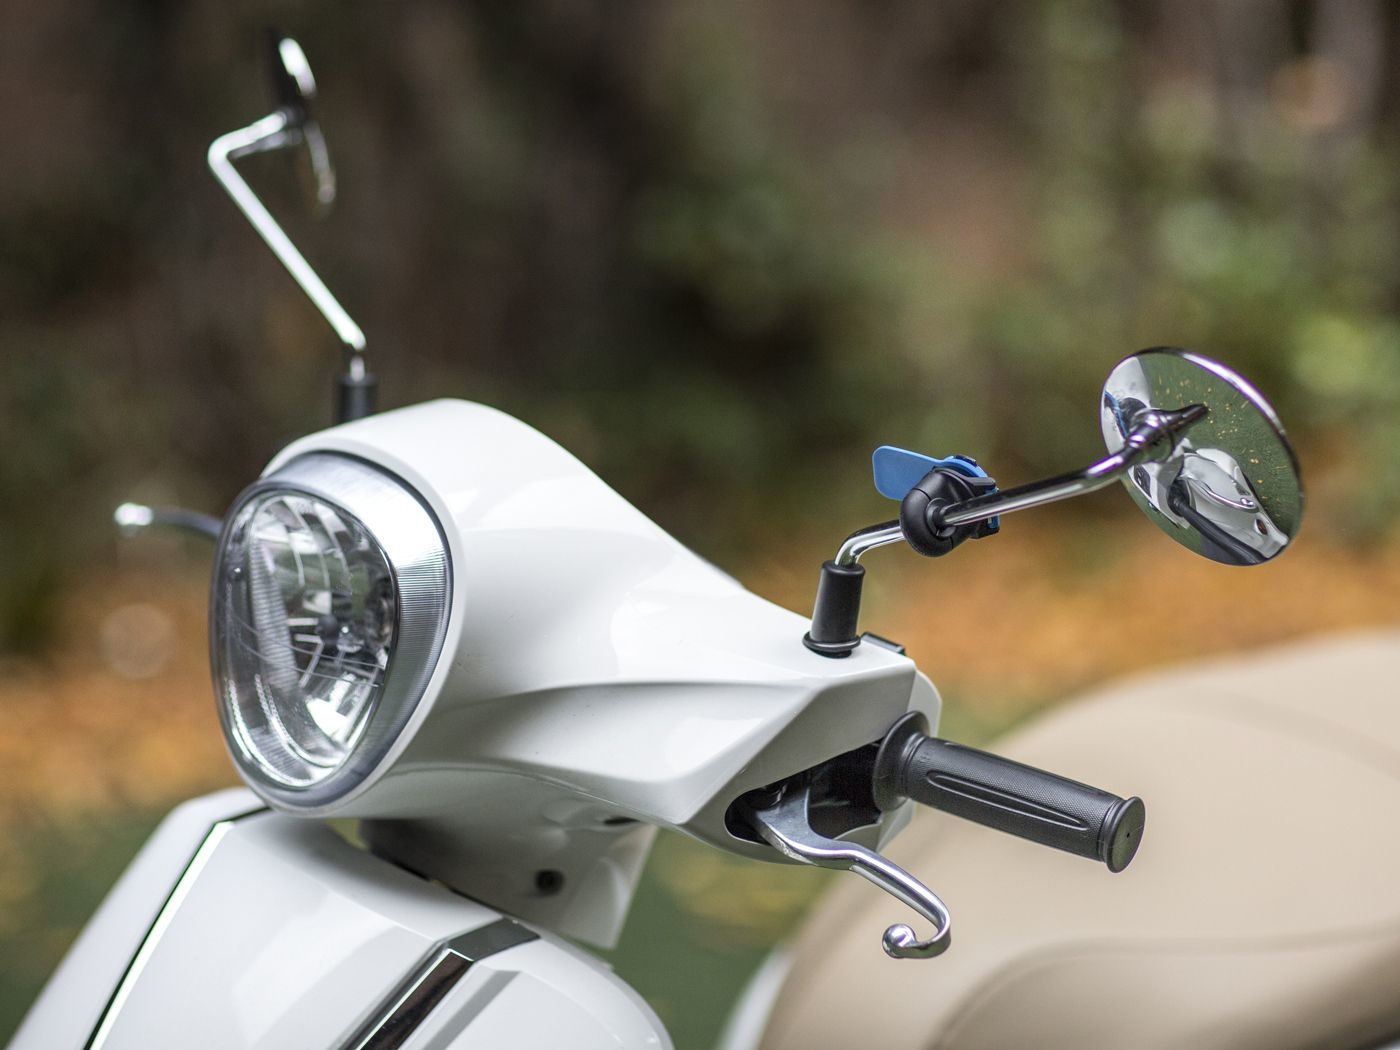 Quad Lock QLM-MIR Motorcycle / Scooter Mirror Mount